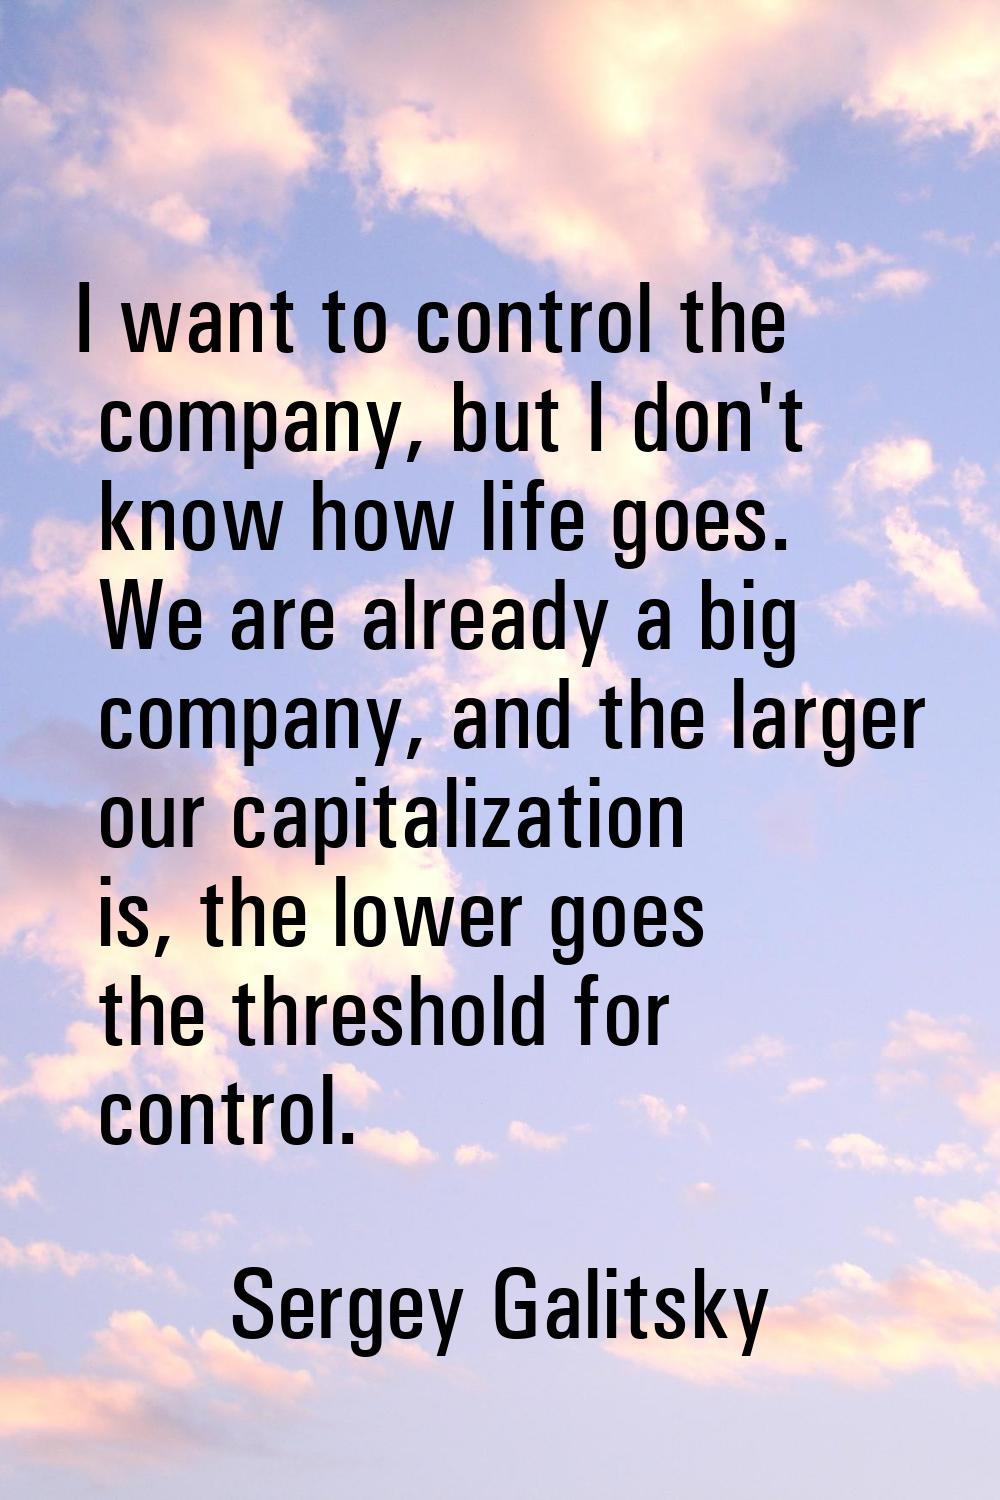 I want to control the company, but I don't know how life goes. We are already a big company, and th